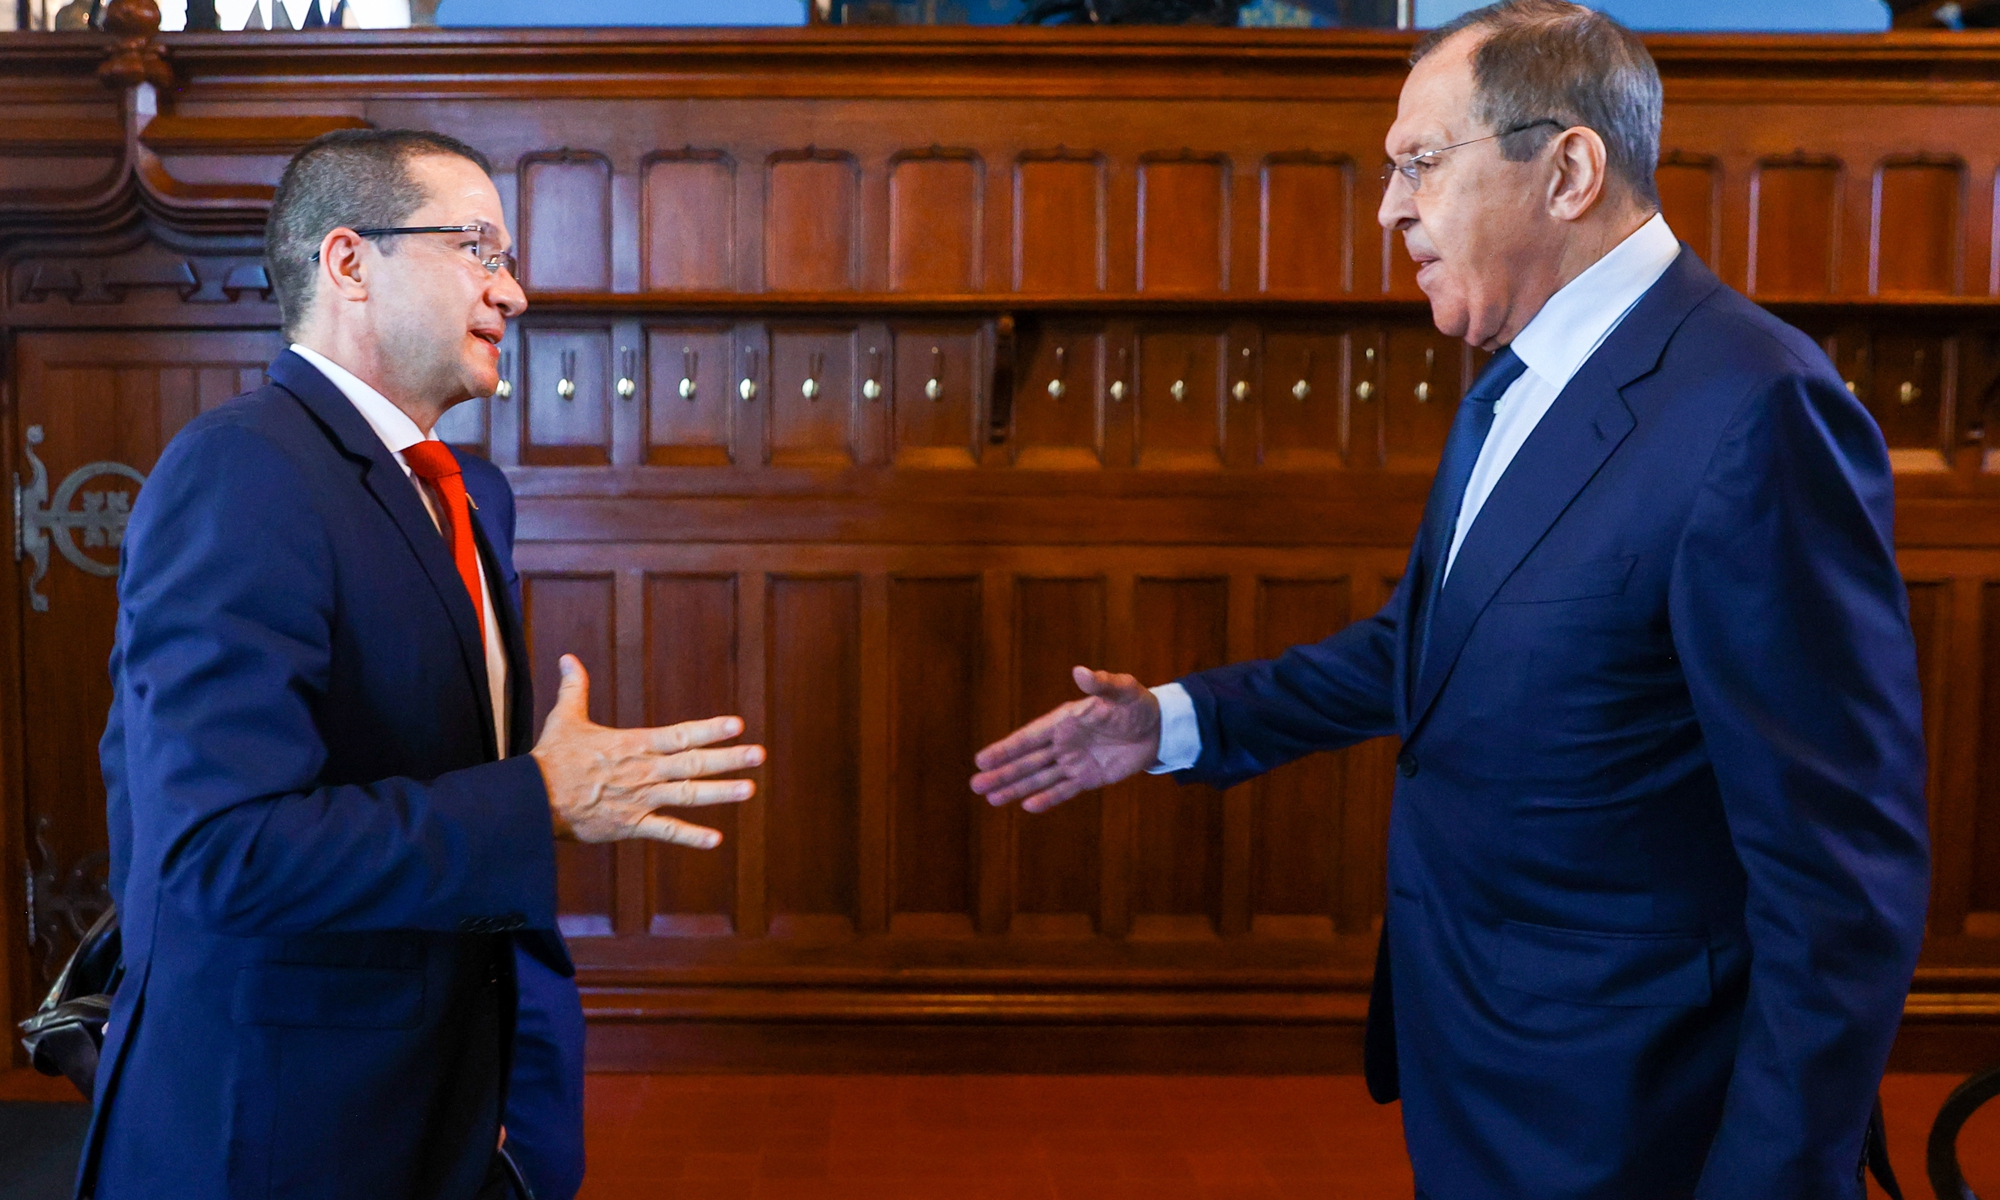 Russian Foreign Minister Sergey Lavrov (right) and his Venezuelan counterpart Carlos Faria meet for talks in Moscow. Both vowed to strengthen cooperation in the face of Western sanctions. Photo: VCG